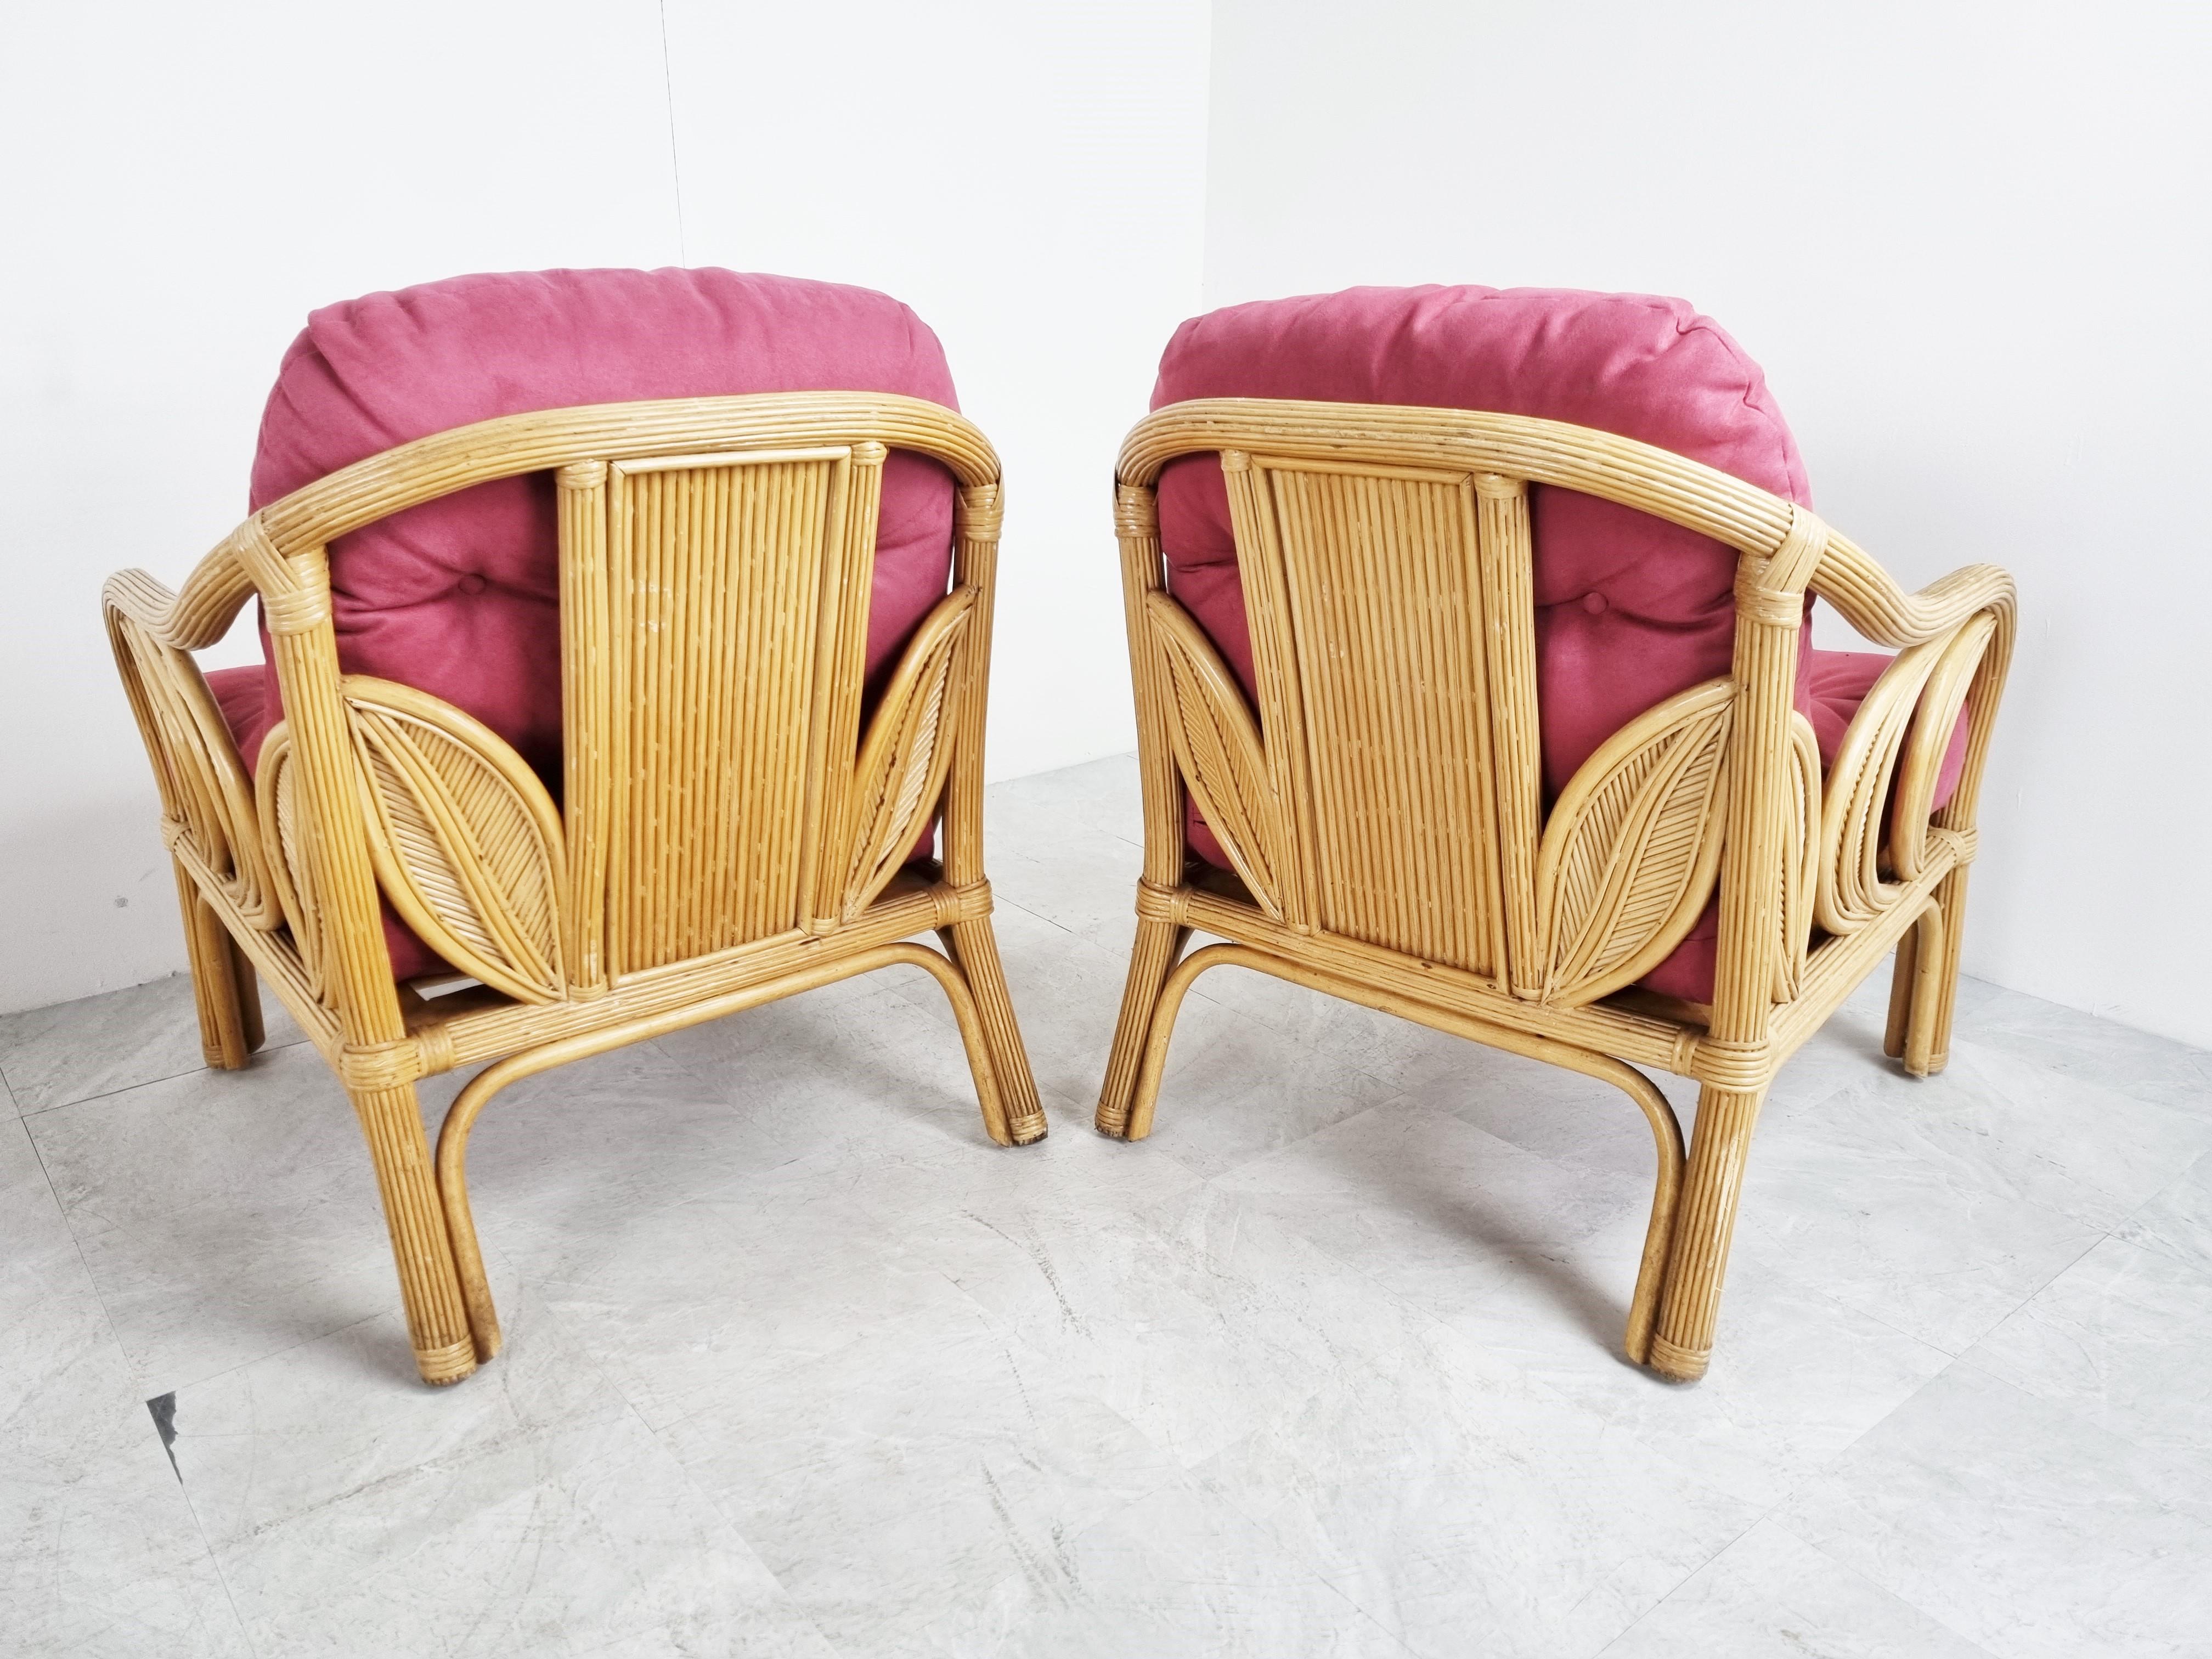 Beautiful Vivai del Sud style sofa set consitsing of a three seater bench and two armchairs.

New pink alcantara cushions offer loads of comfort.

Beautiful reeded and decorated bamboo frames.

1980s - France

Dimensions:
3 seater:
Height: